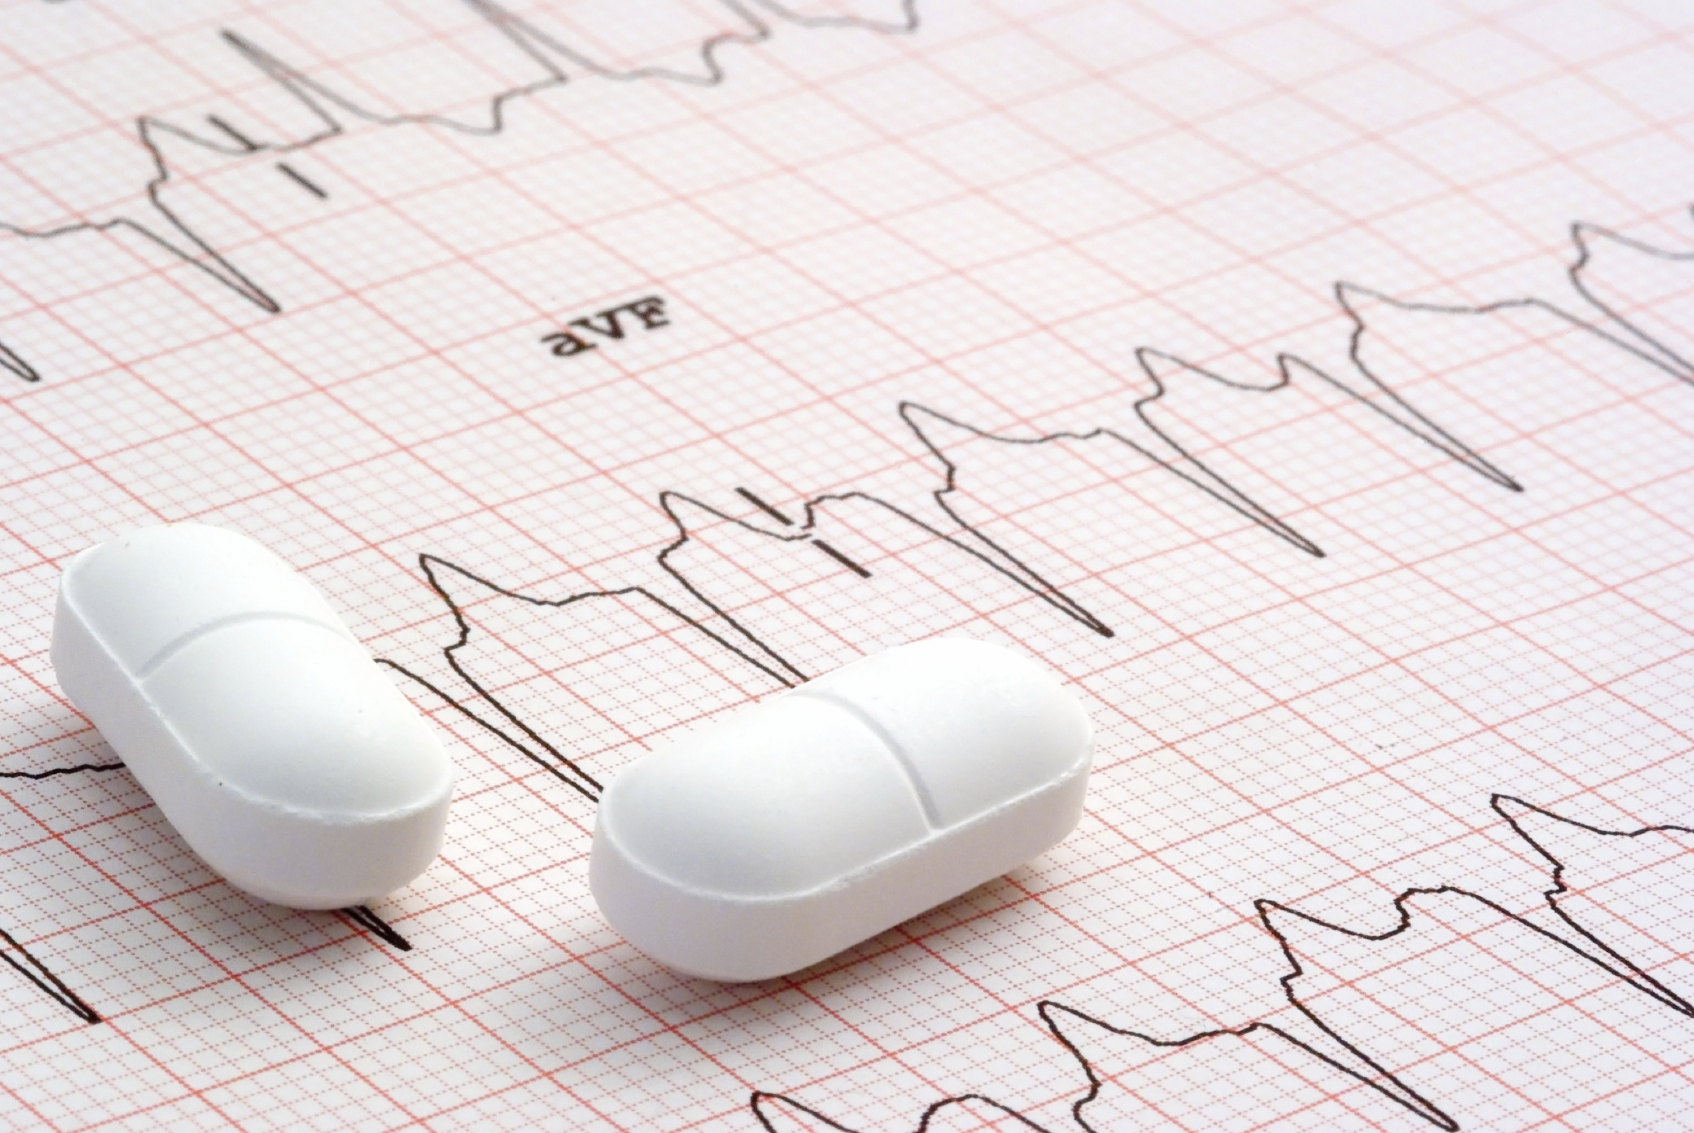 Irregular heartbeat a possible side effect of osteoporosis medication